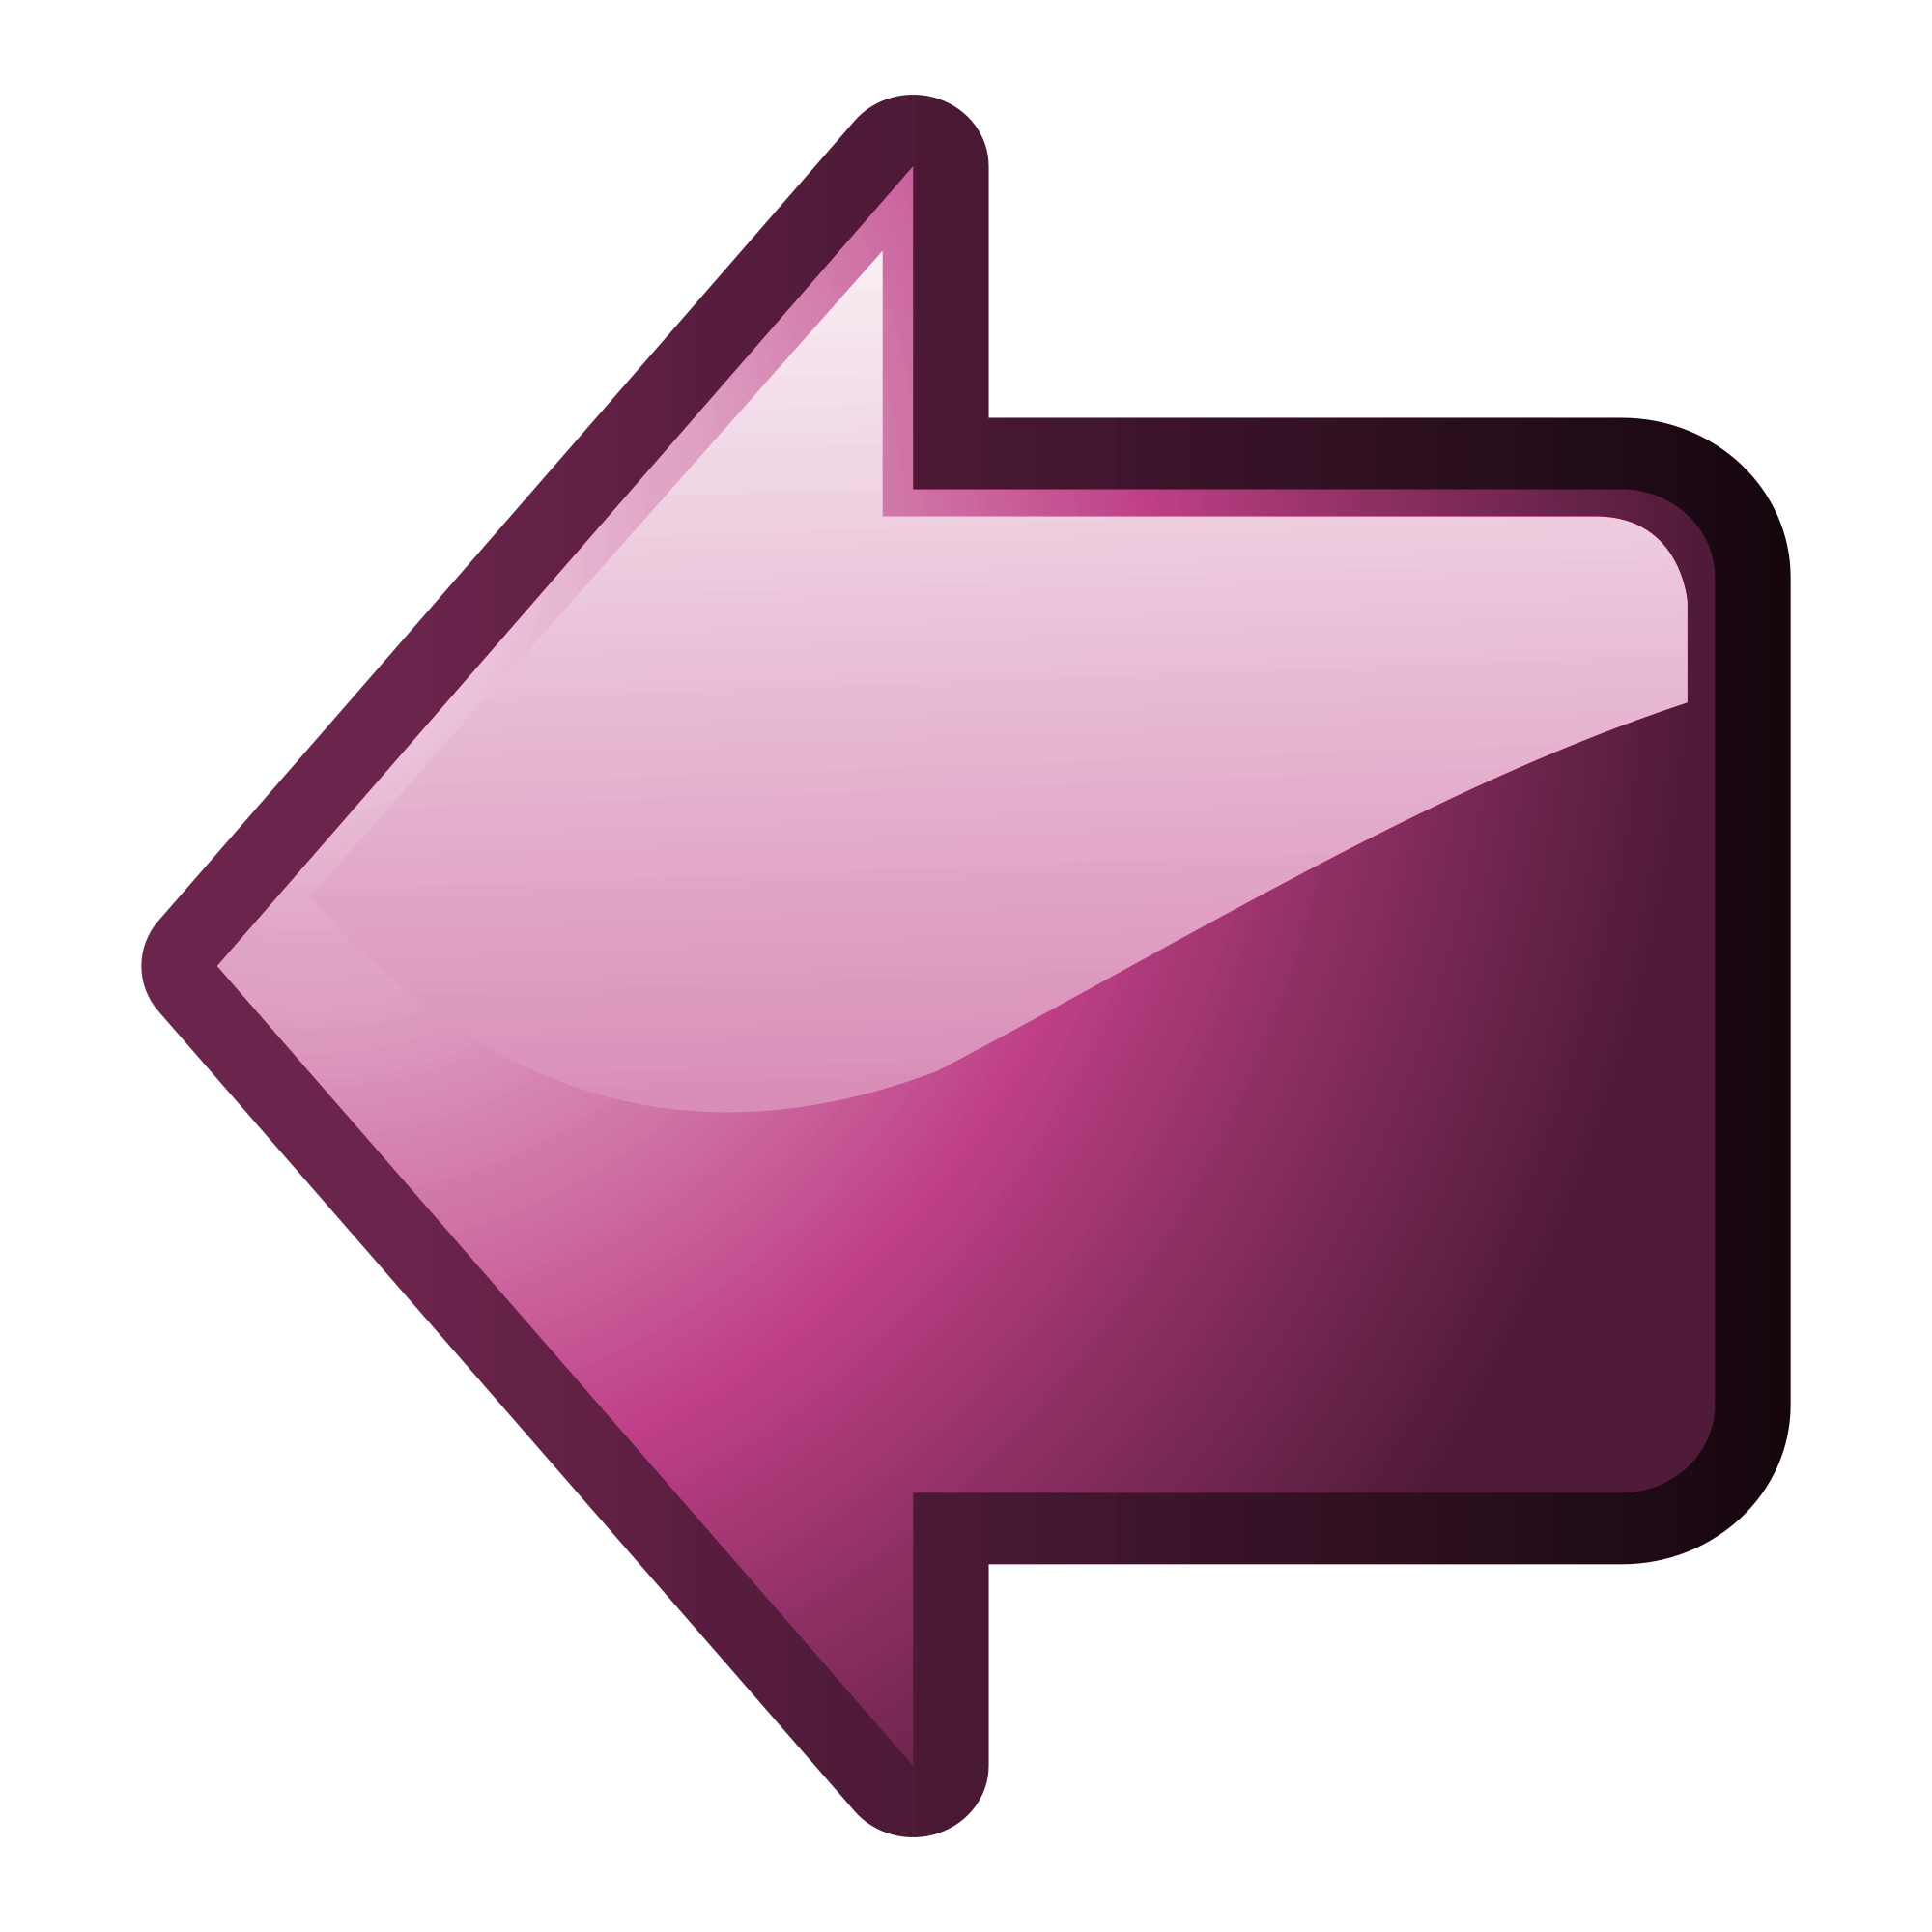 File:Nuvola arrow left pink.png - Wikimedia Commons